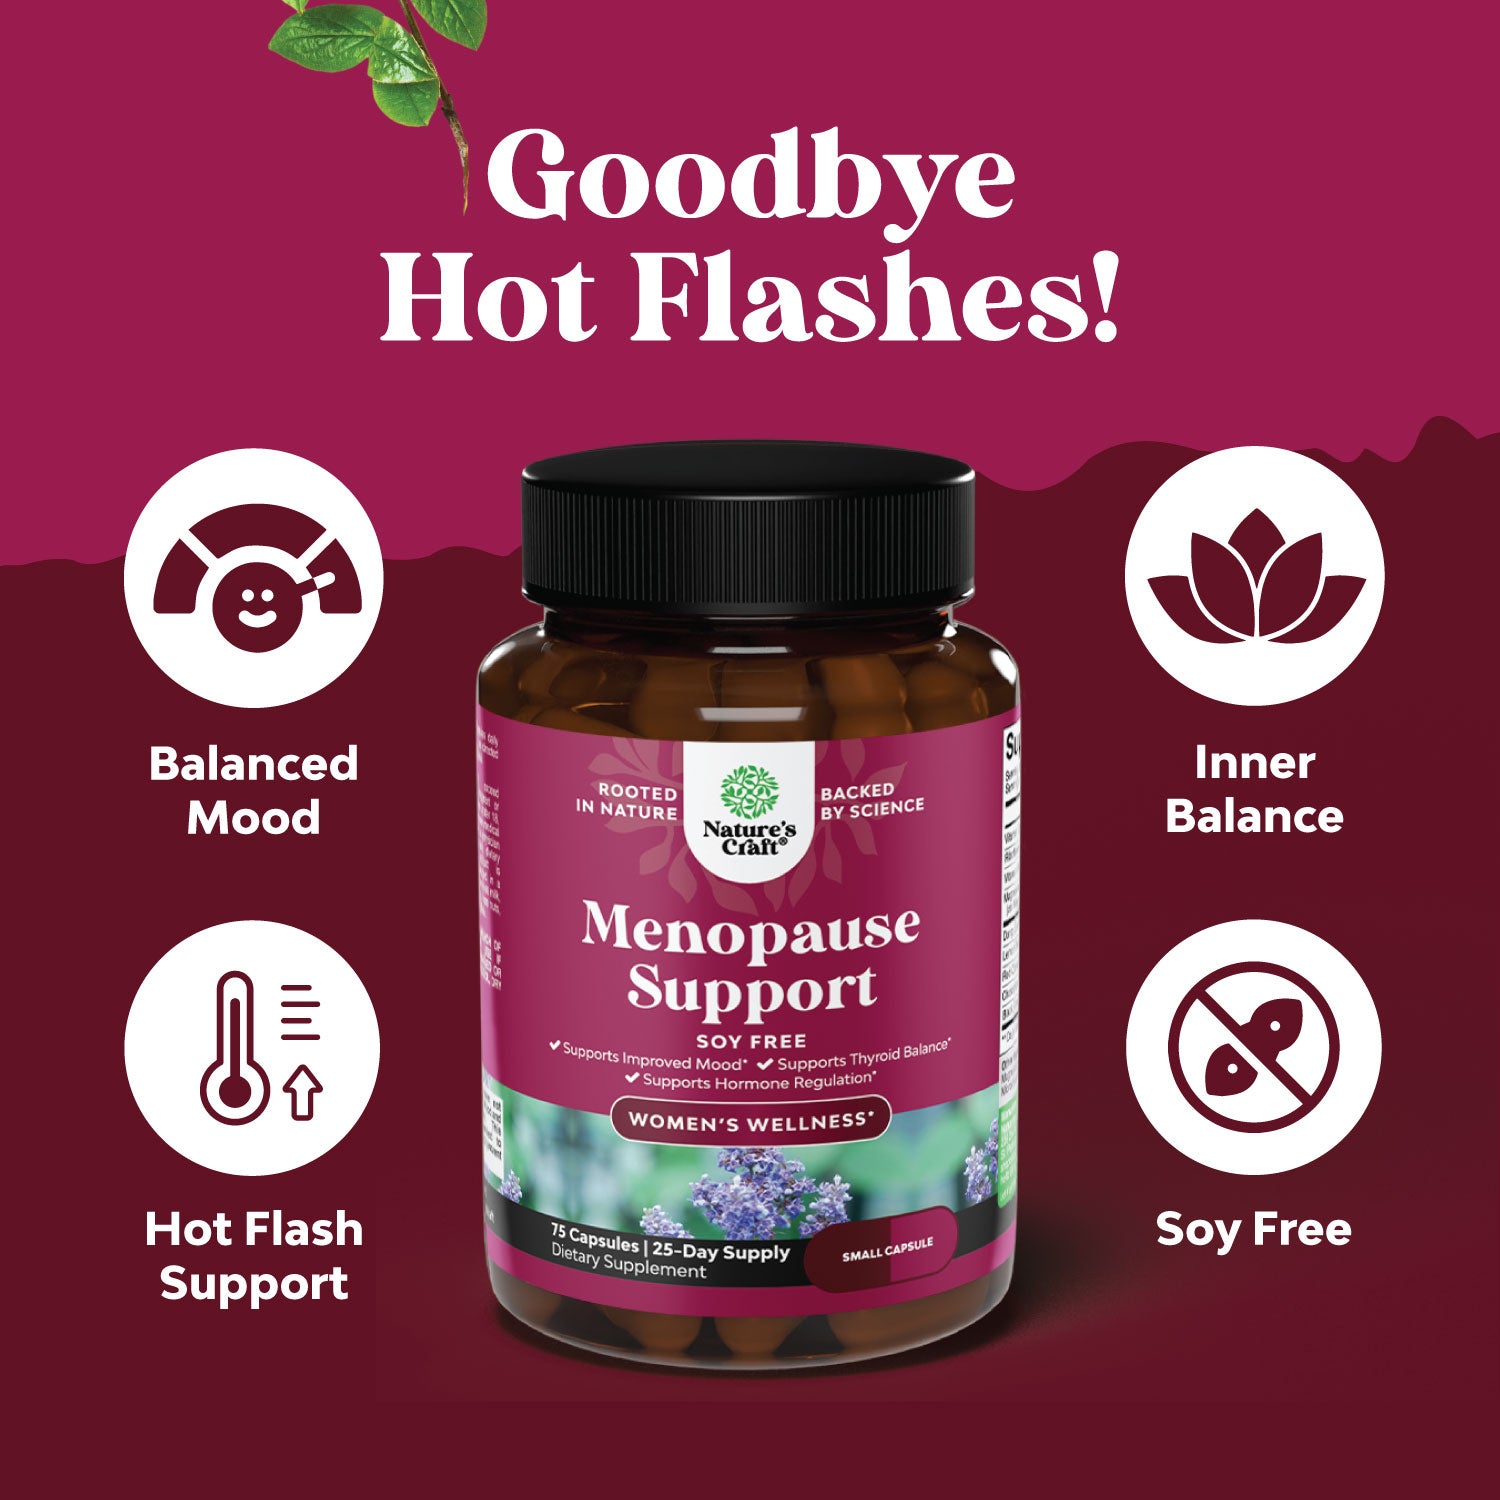 Menopause Support - Soy Free